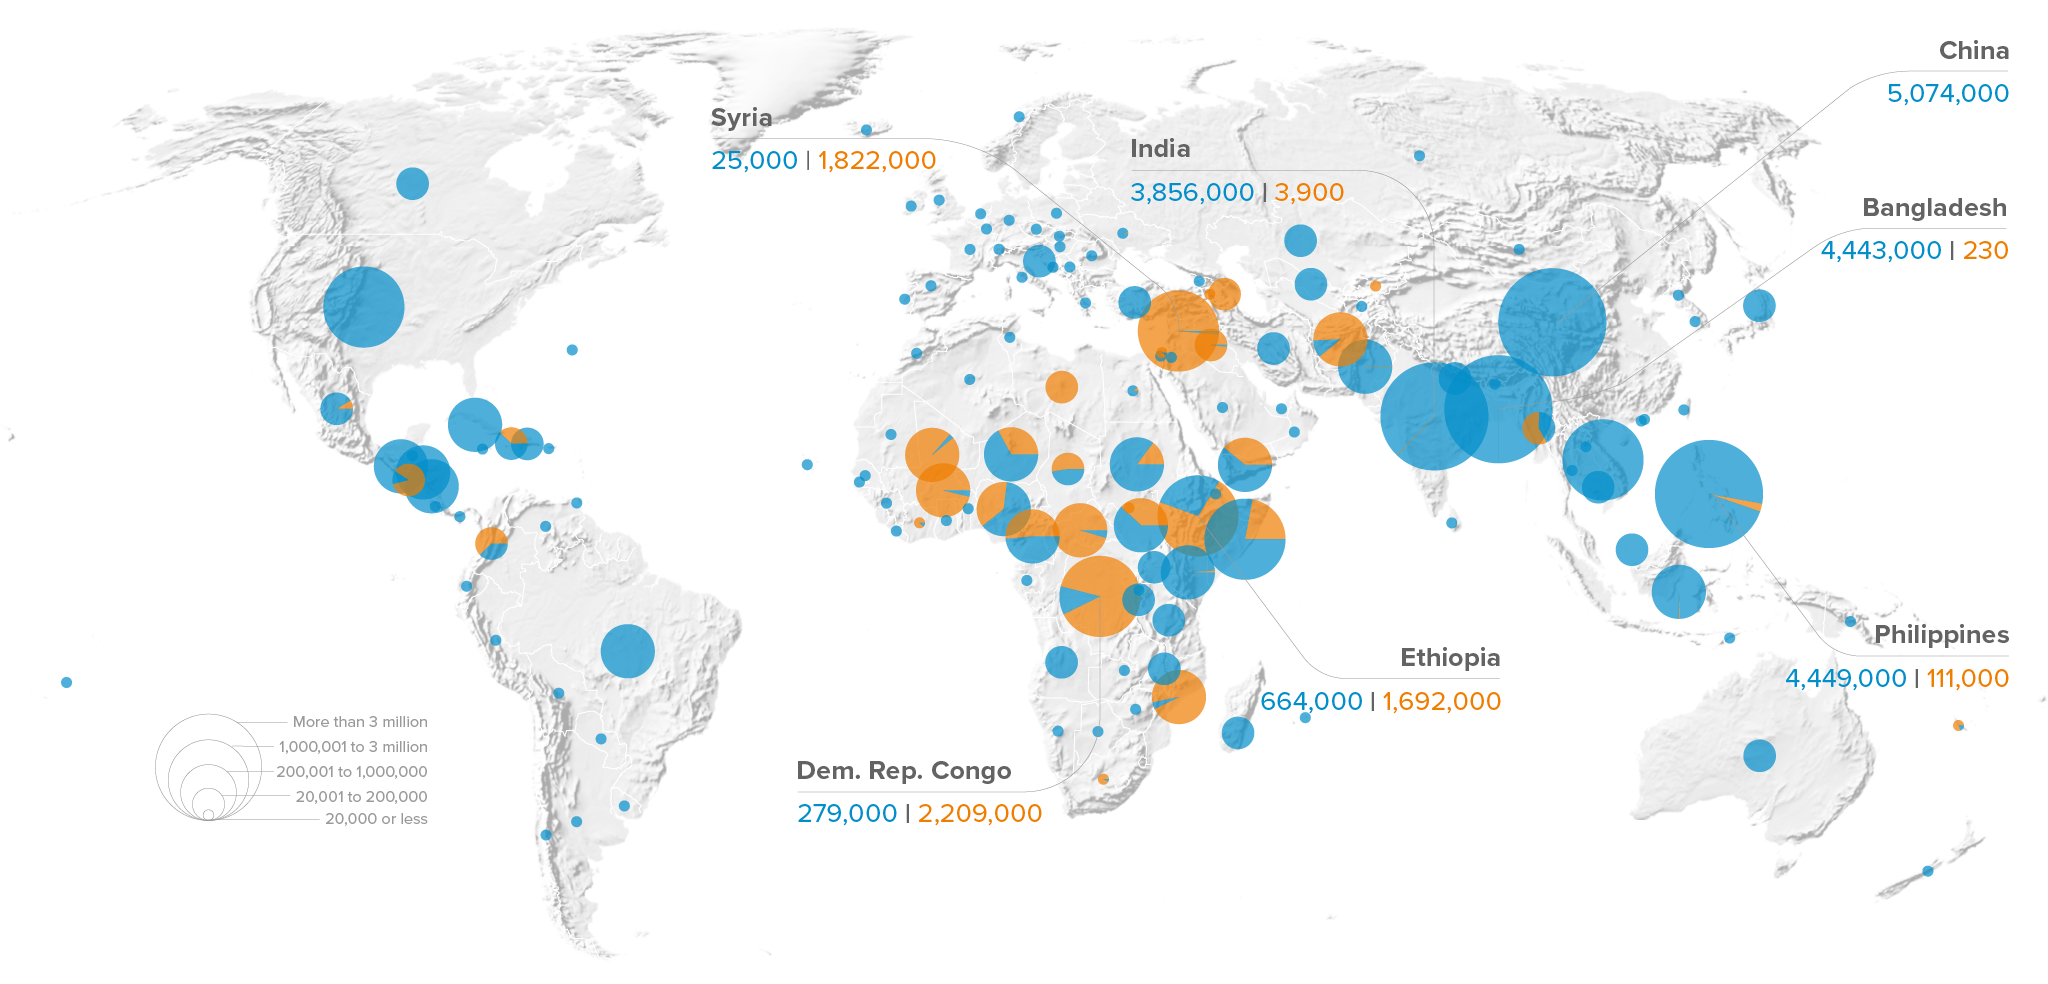 World map showing countries and territories with most new displacements in 2020